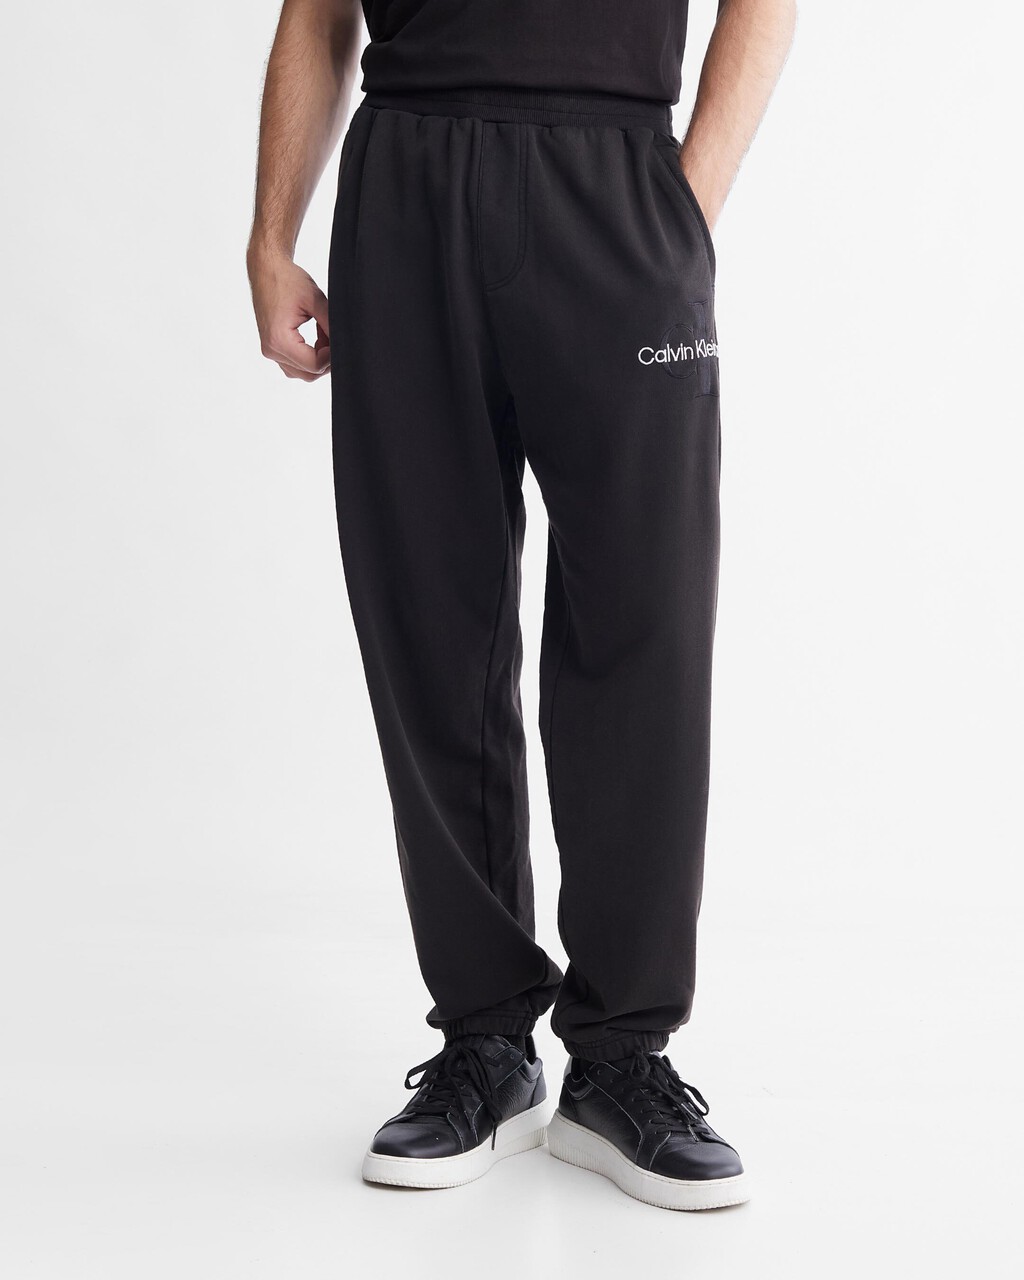 Mineral Dye Relaxed Sweatpants, Ck Black, hi-res